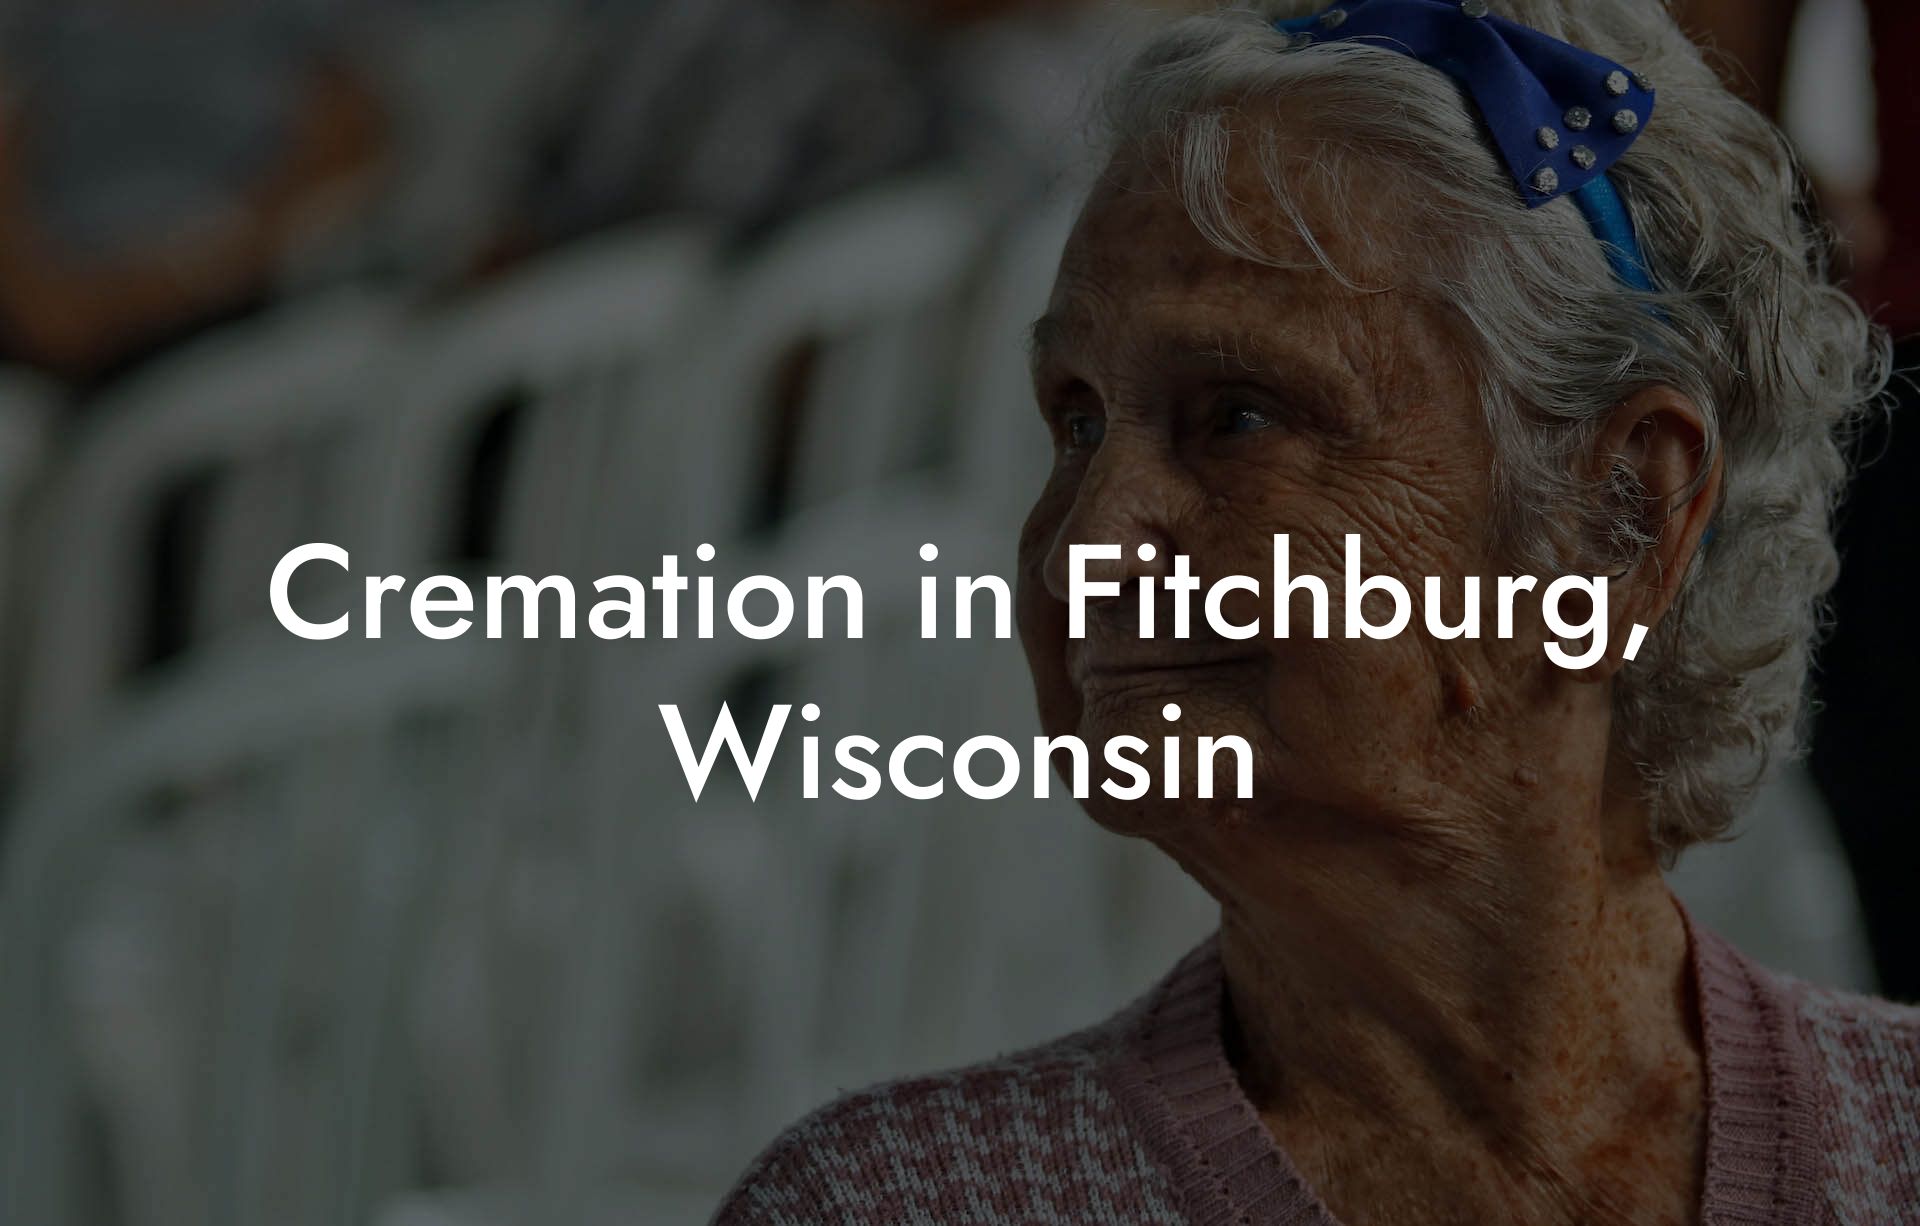 Cremation in Fitchburg, Wisconsin